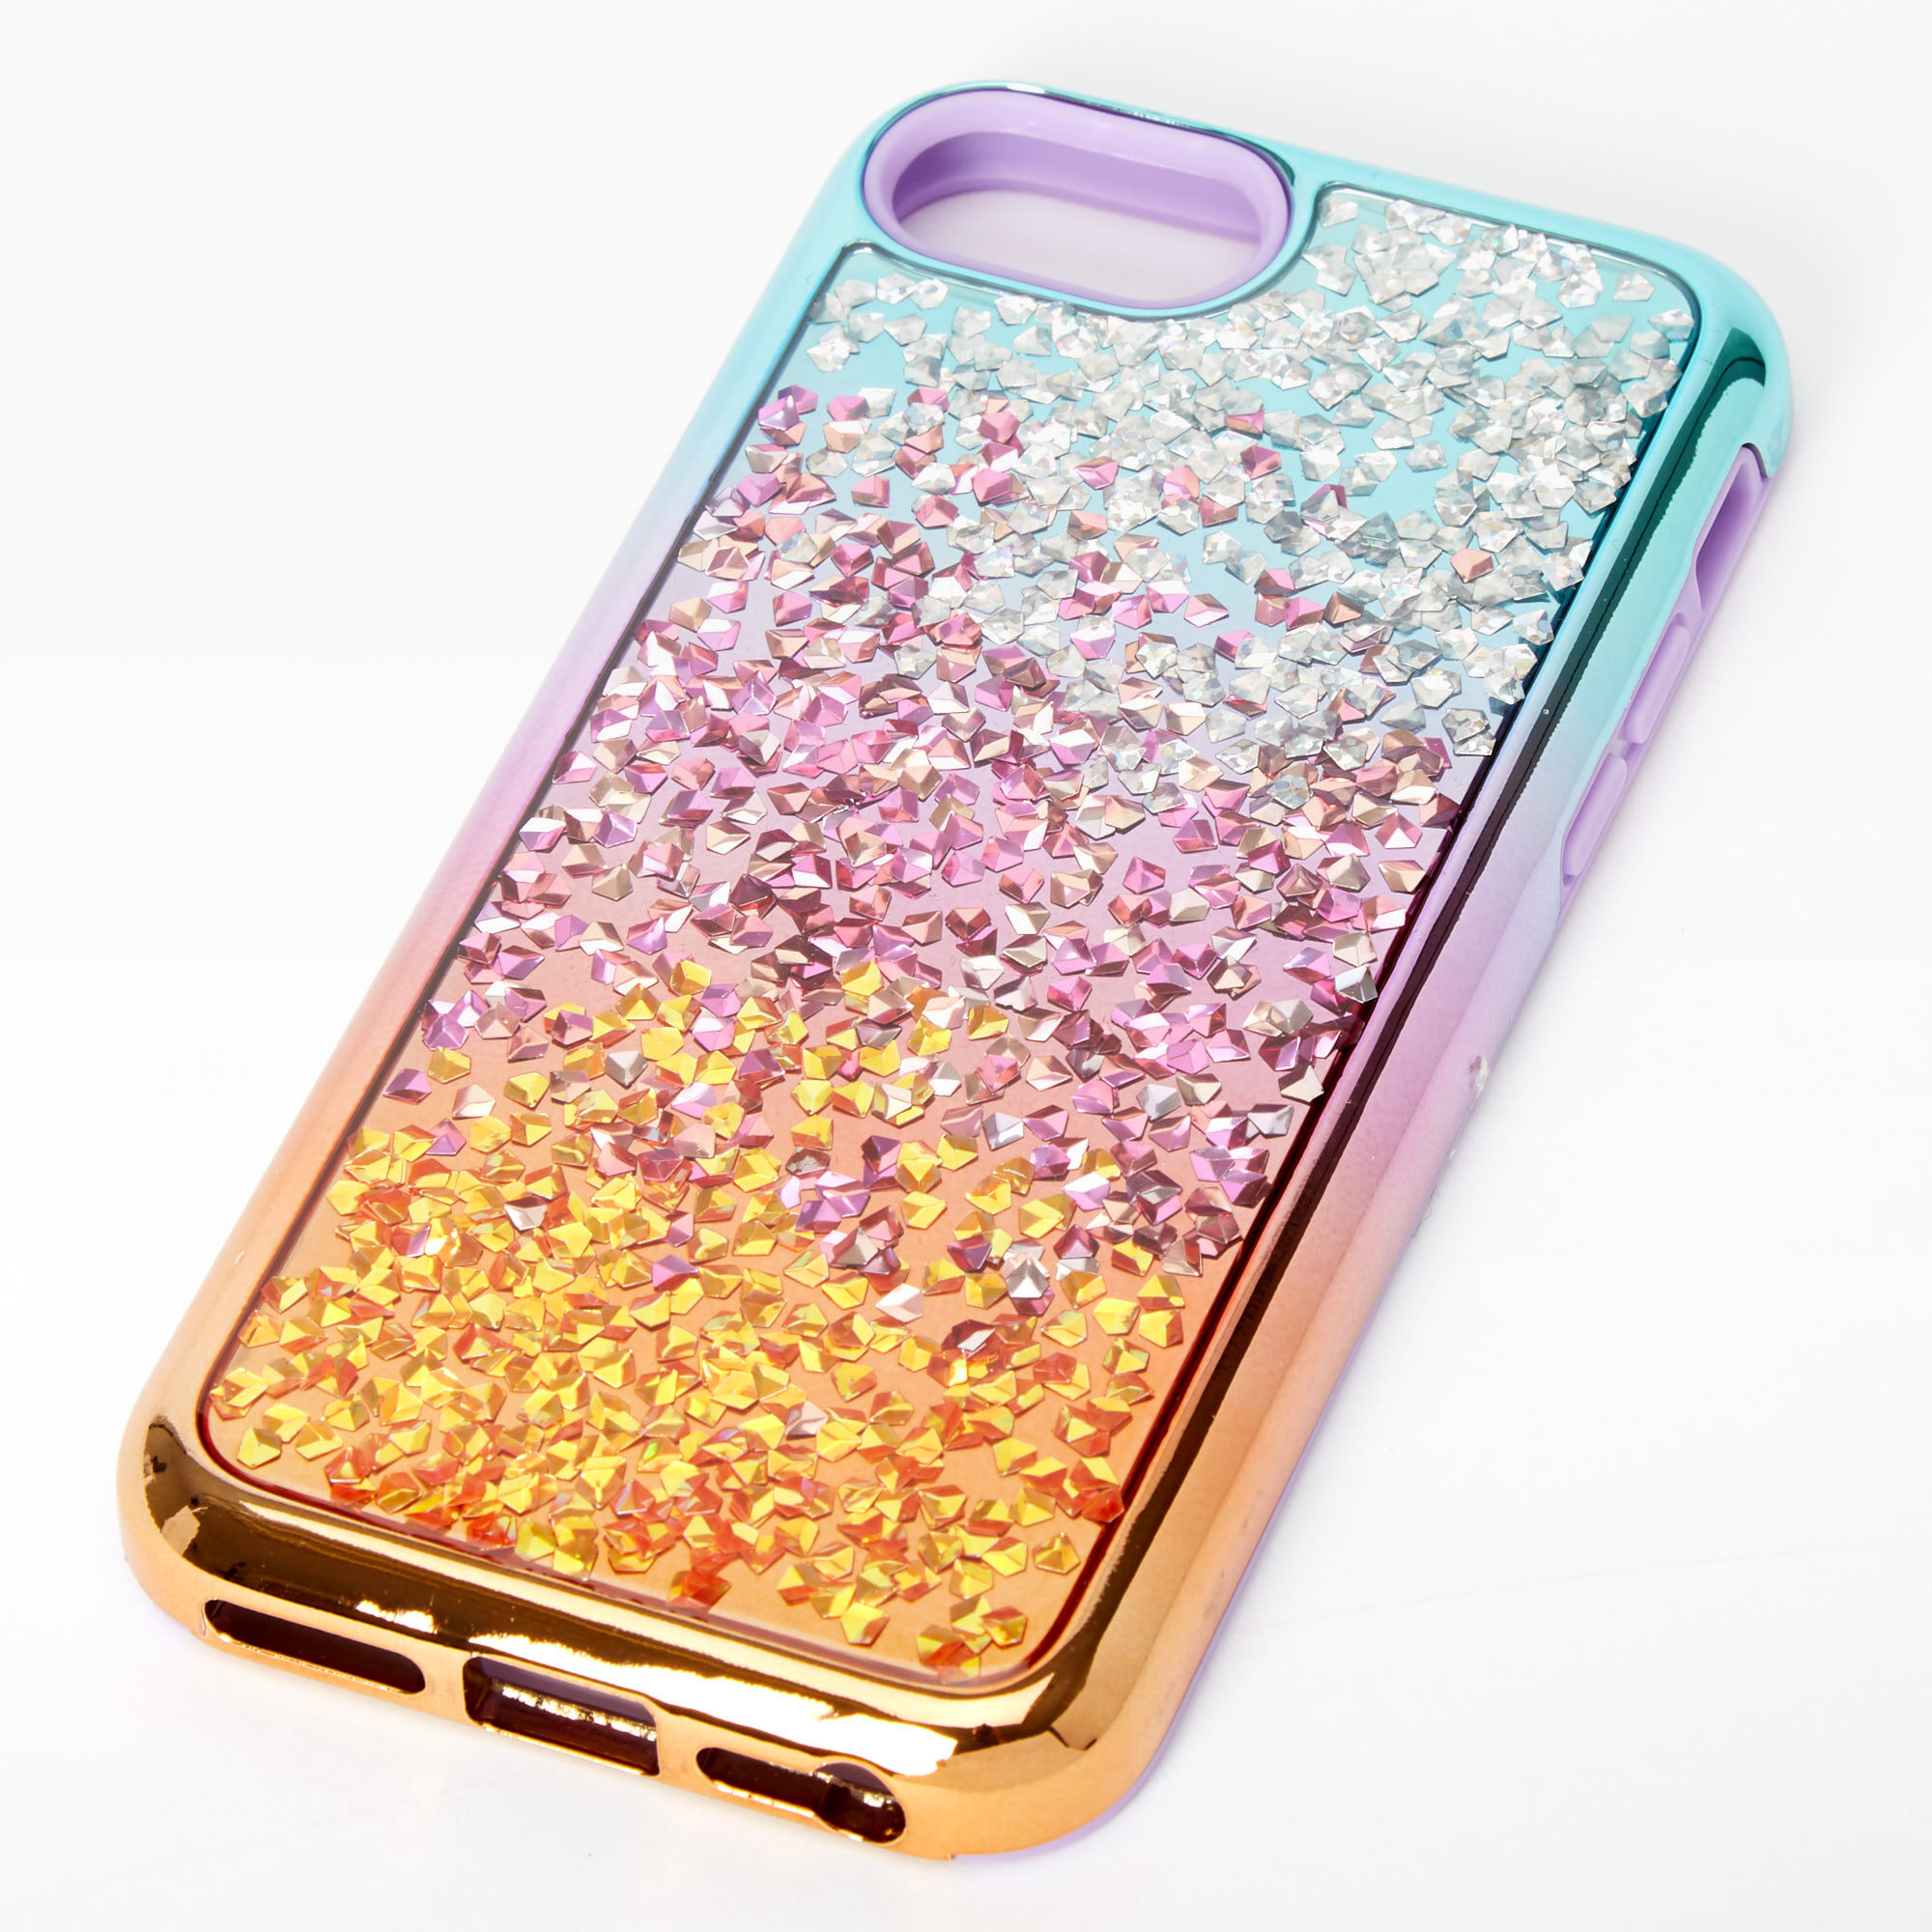 Ombre Chunky Glitter Protective Phone Case - Fits Iphone 6/7/8/SE ...